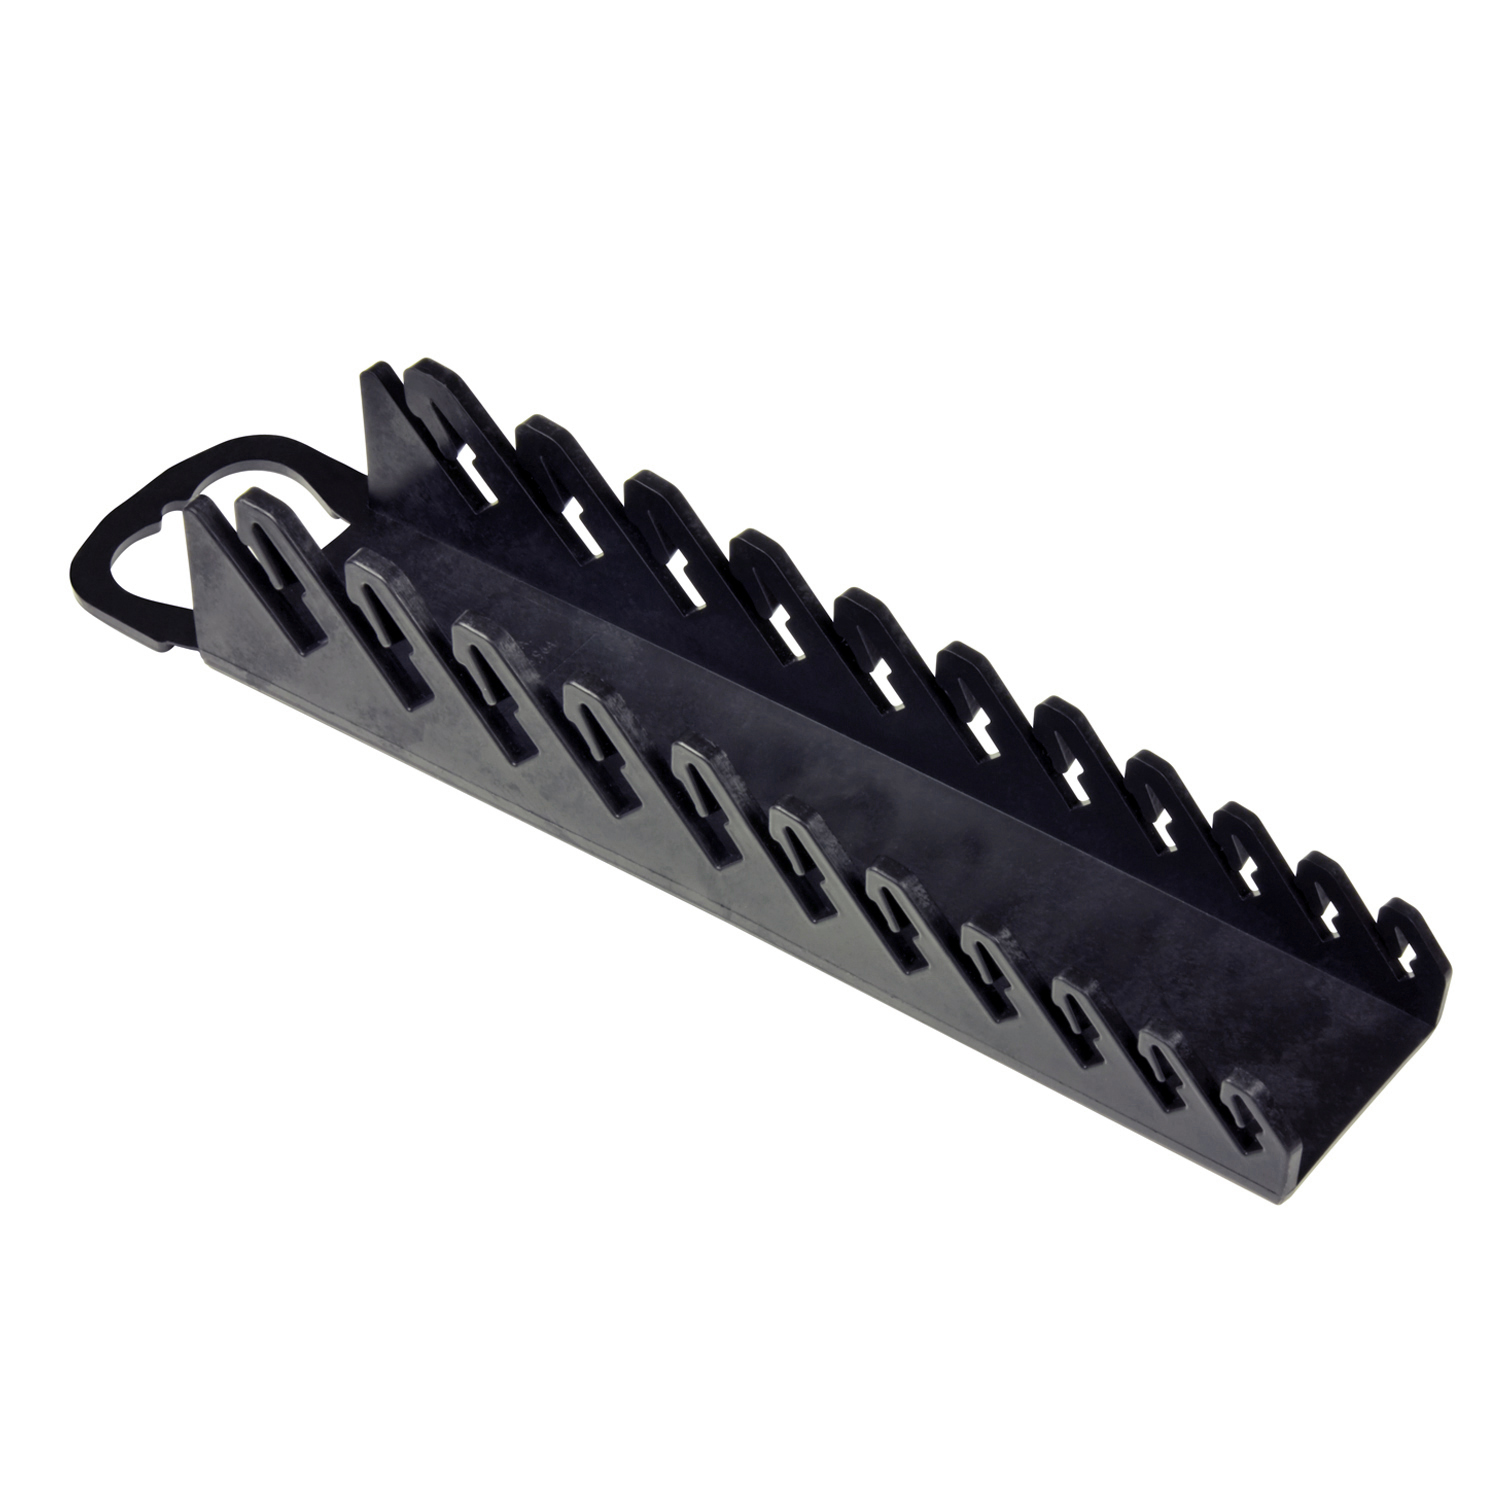 http://www.ernstmfg.com/Shared/Images/Product/5077-GRIPPER-Stubby-Wrench-Organizers-Black-11-Tool/789455050777.MAIN.jpg